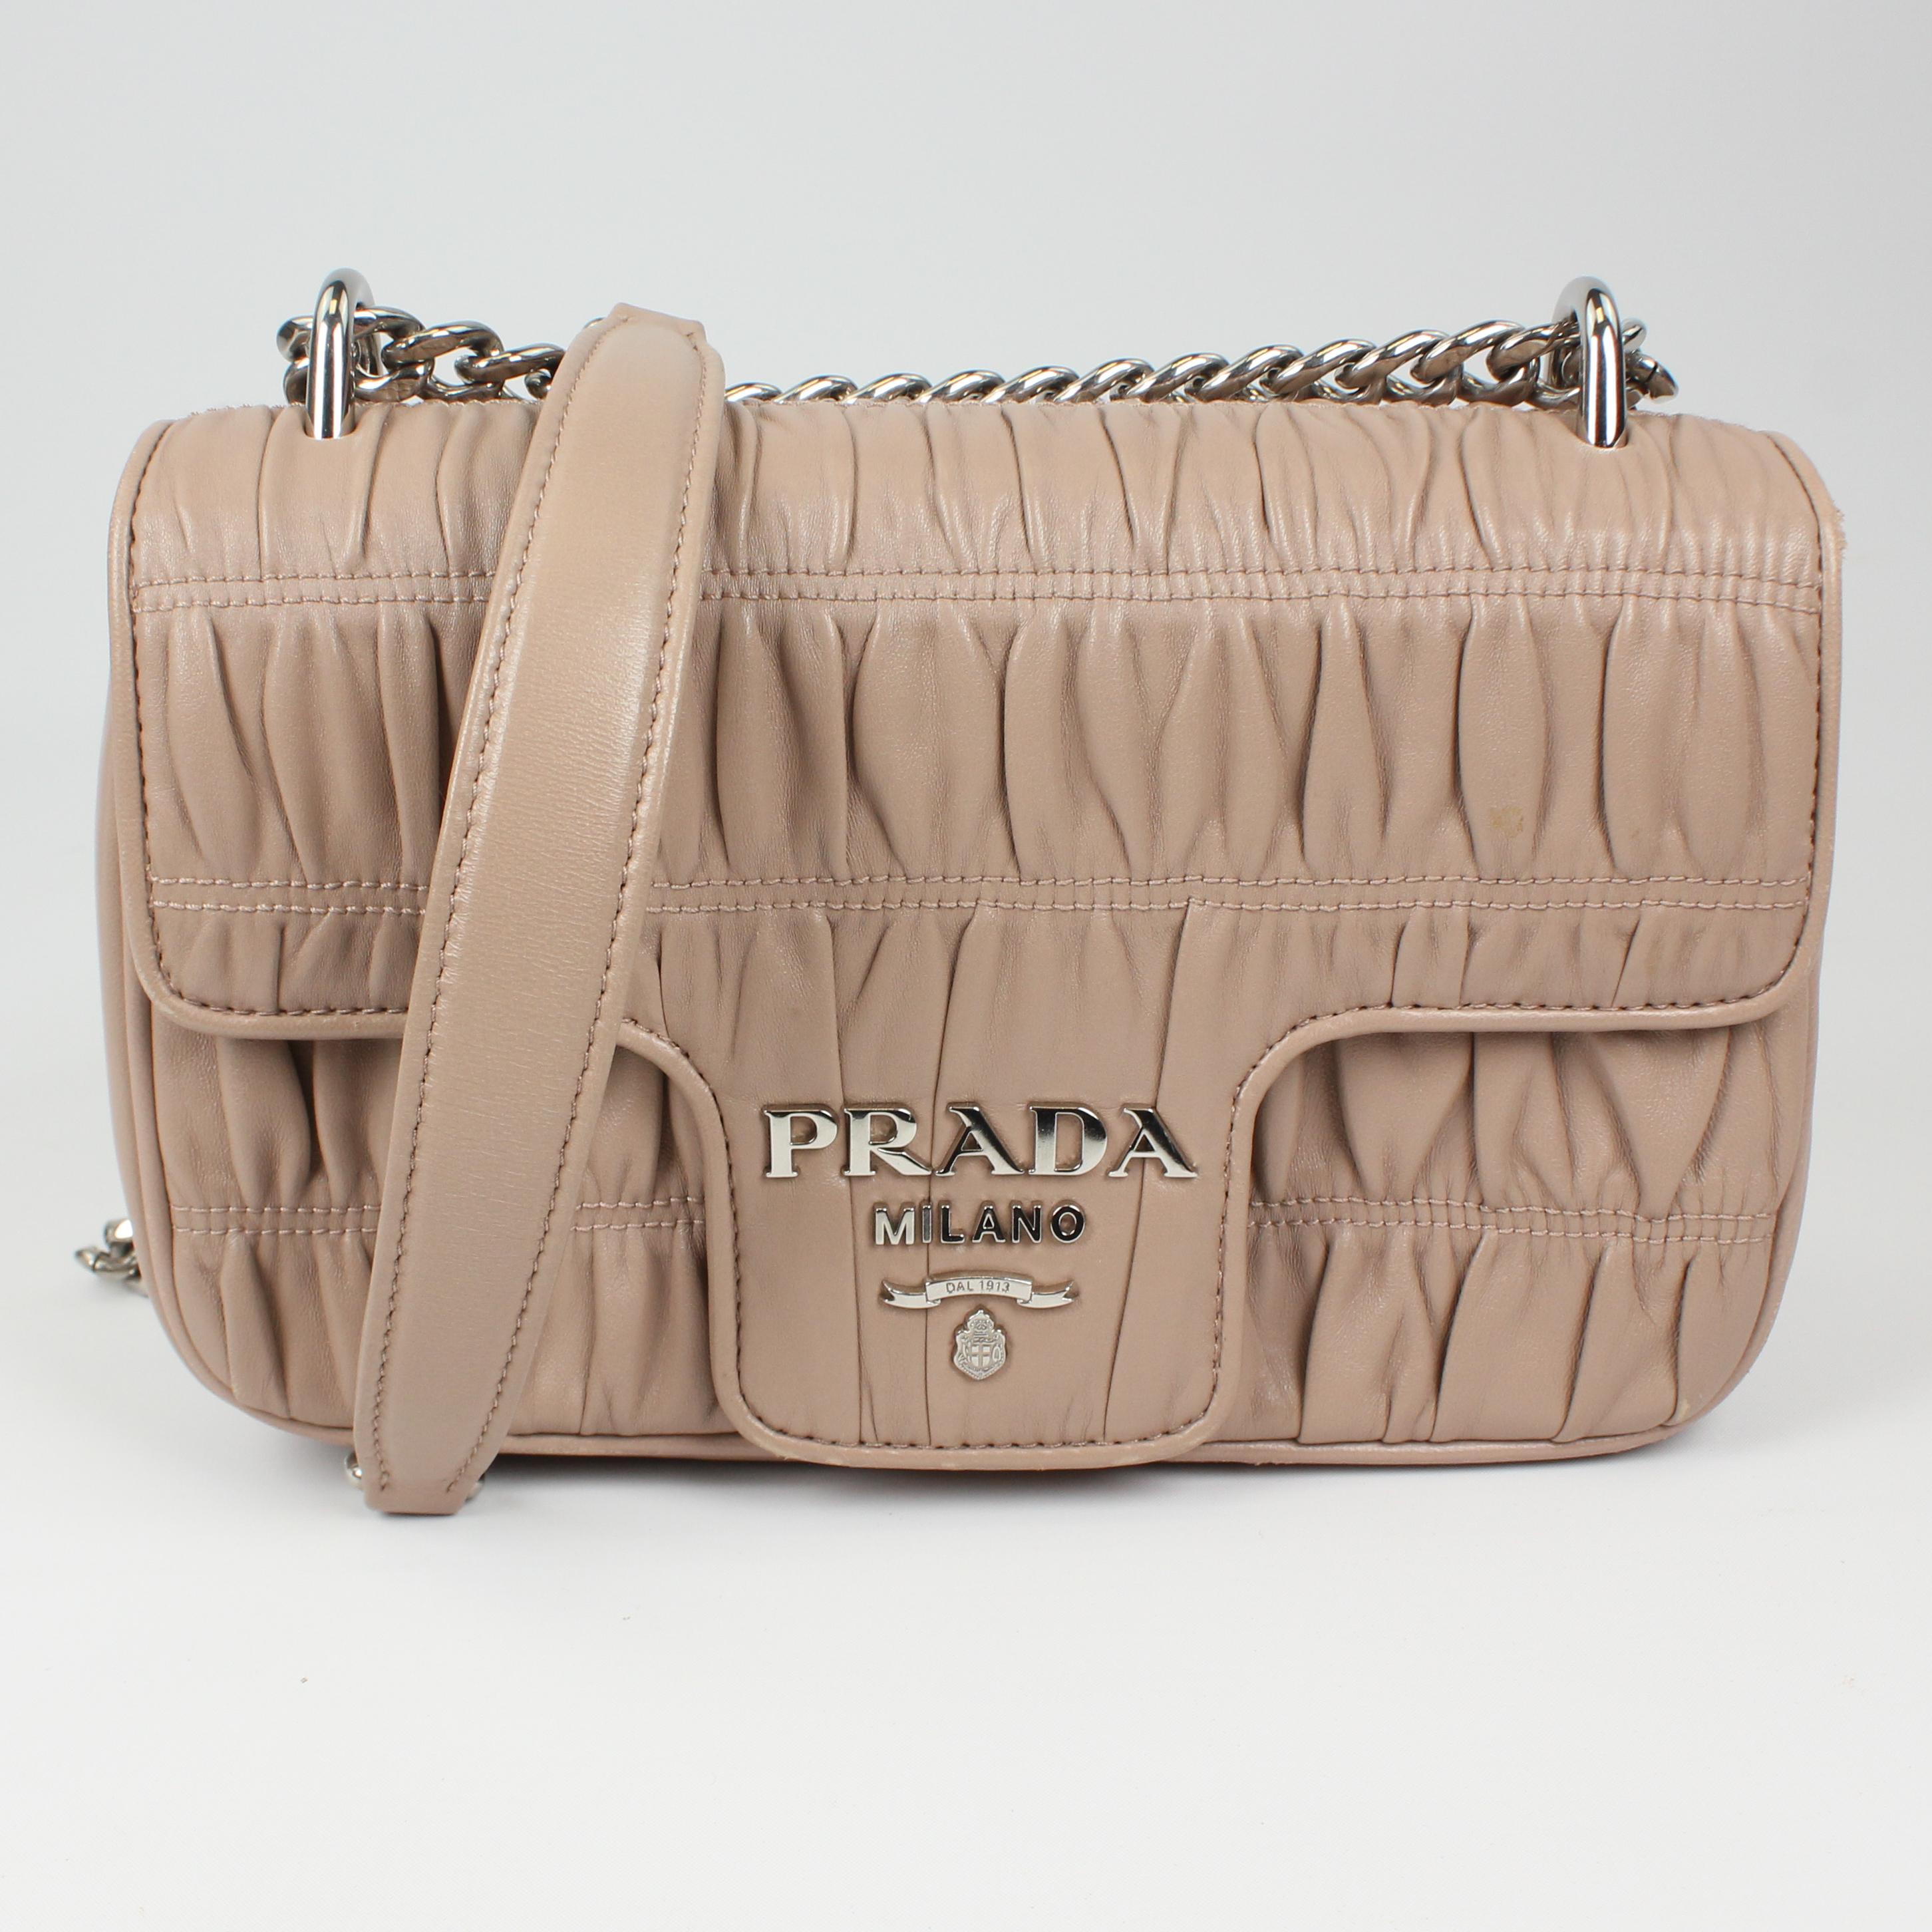 The flap has a nose-like design and the center is crafted with the new Prada logo. This handbag is the house’s latest design and it looks like it will pave its way to the iconic status. Also this handbag comes with a long chain strap for shoulder